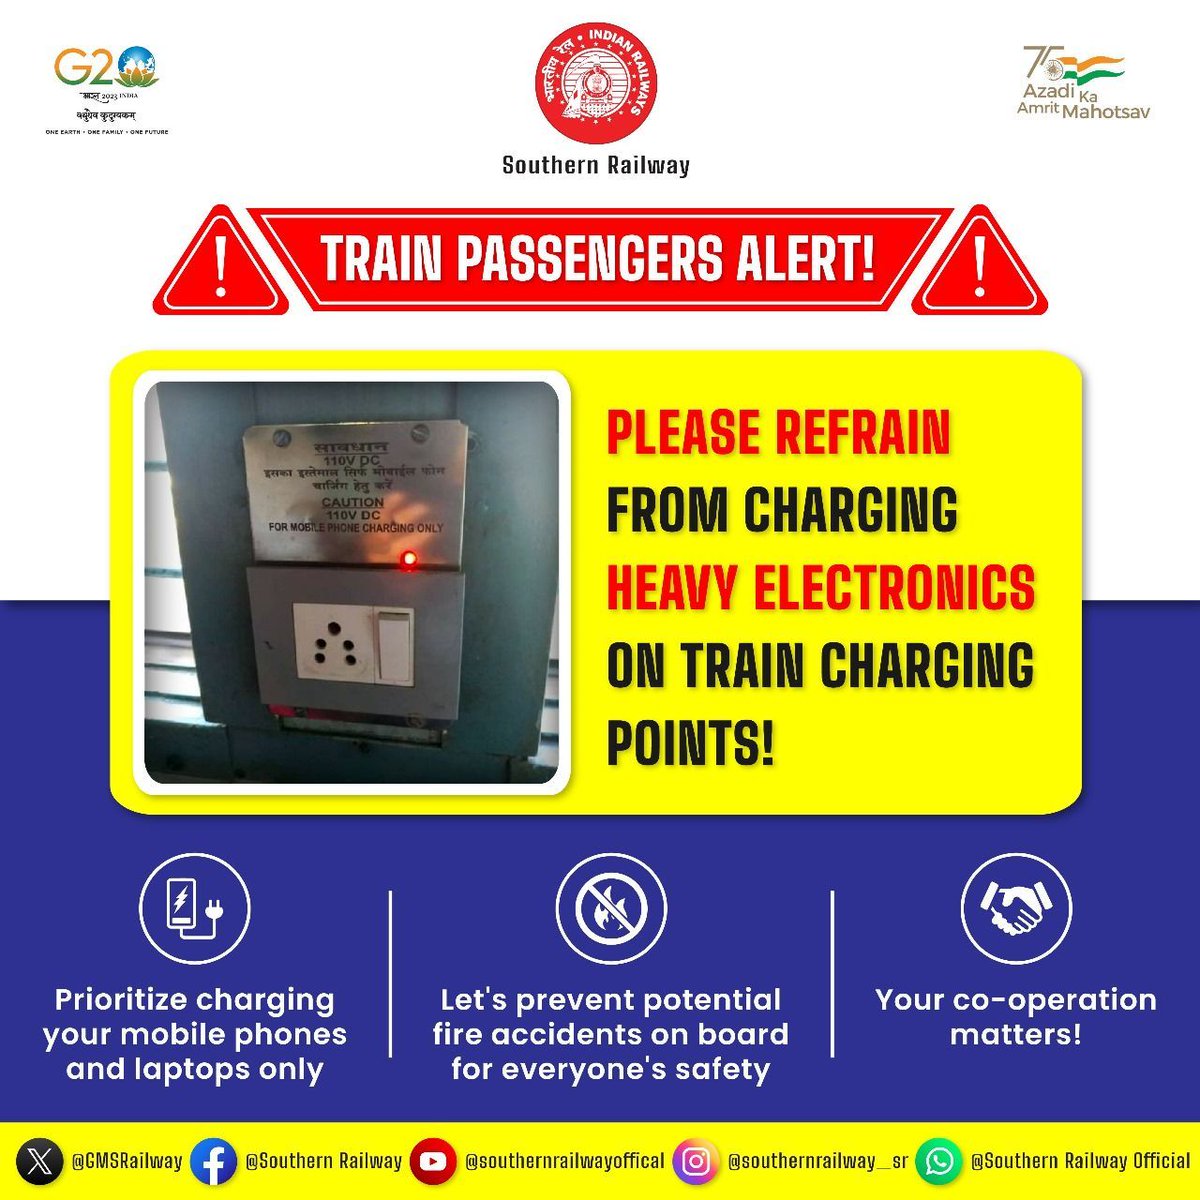 #TrainTravel tip: Play it safe! 

Charging high-powered devices can overload circuits and lead to fire. Stick to phones and low-wattage electronics

#TrainSafety  #FireSafety  #TravelSafe #SouthernRailway #RailwaySafety